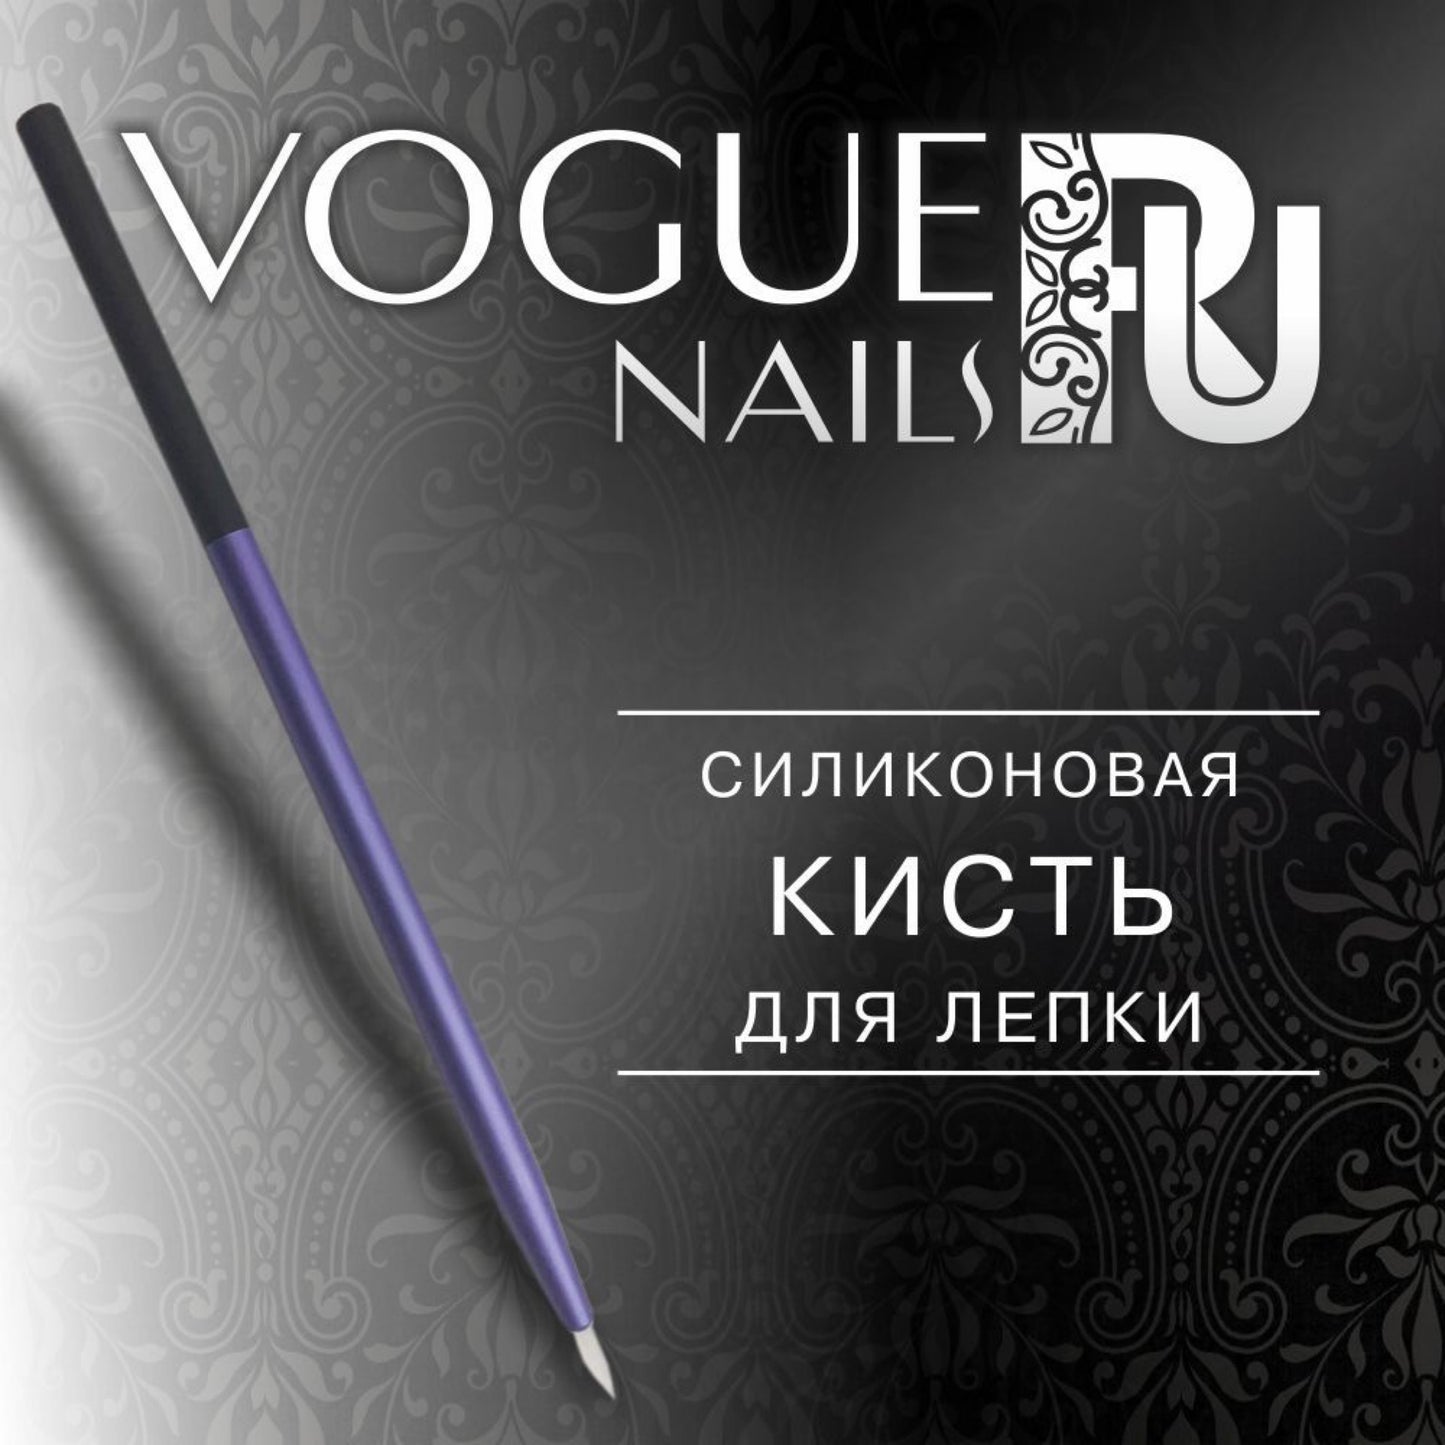 Silicone Brush for Modeling Vogue Nails